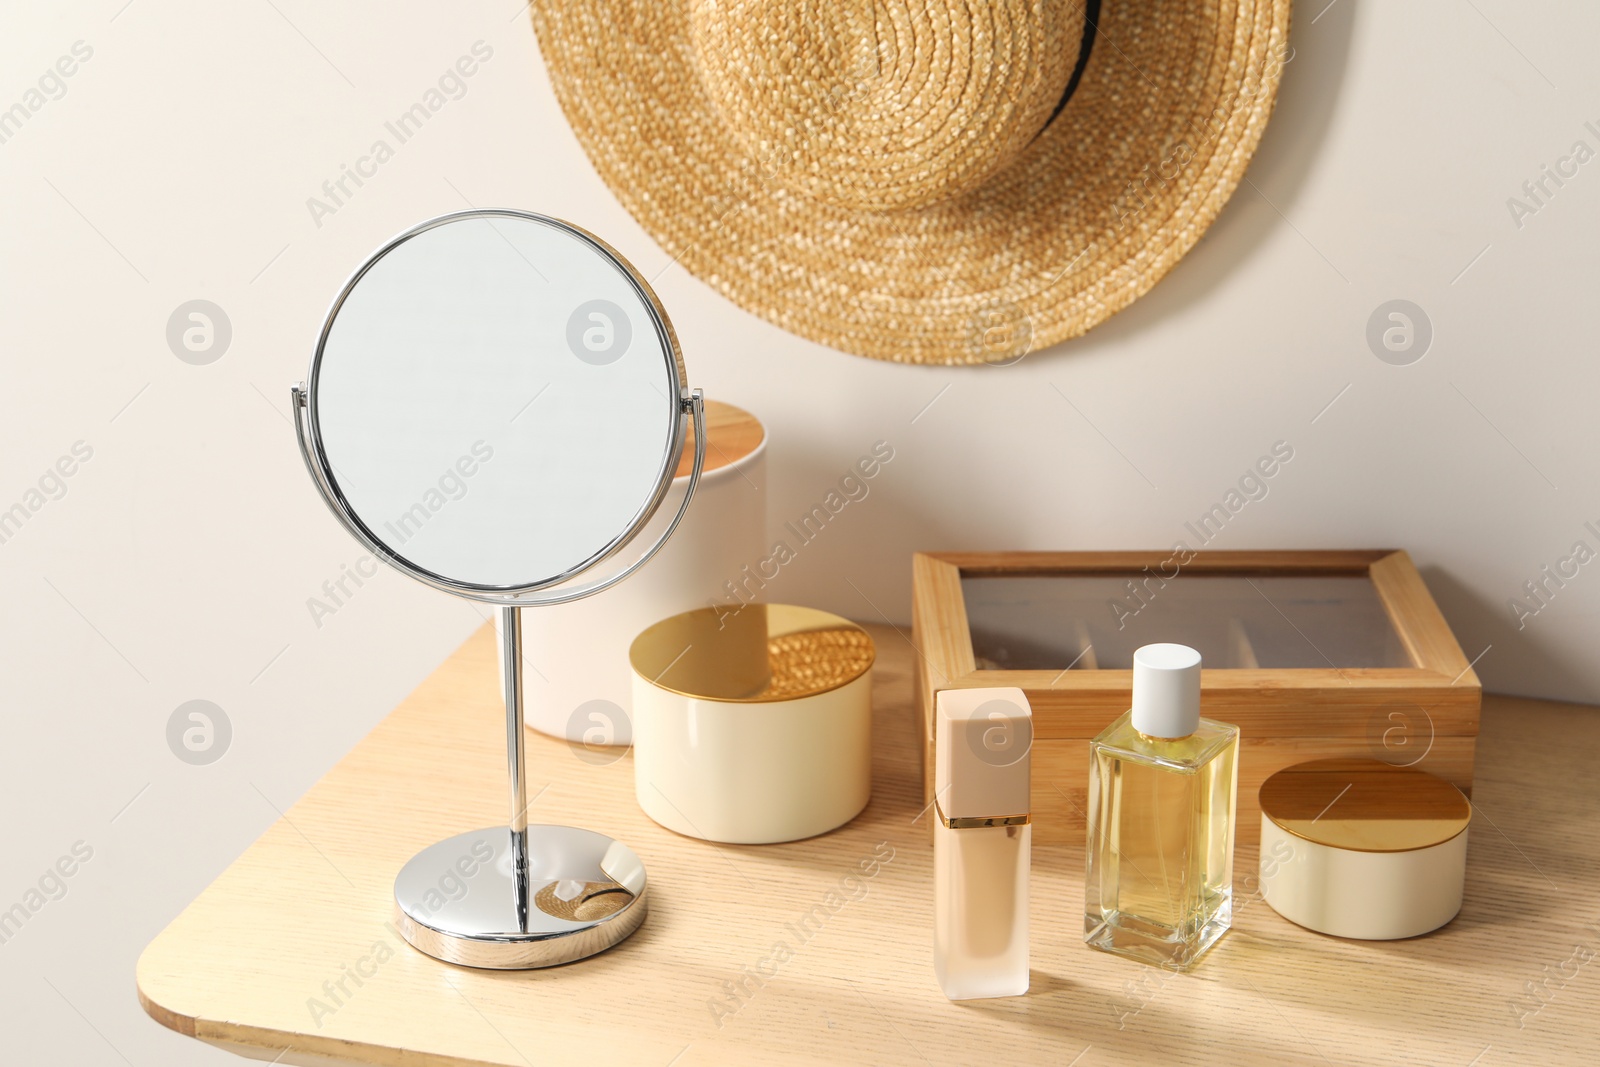 Photo of Mirror, perfume and makeup products on dressing table in room